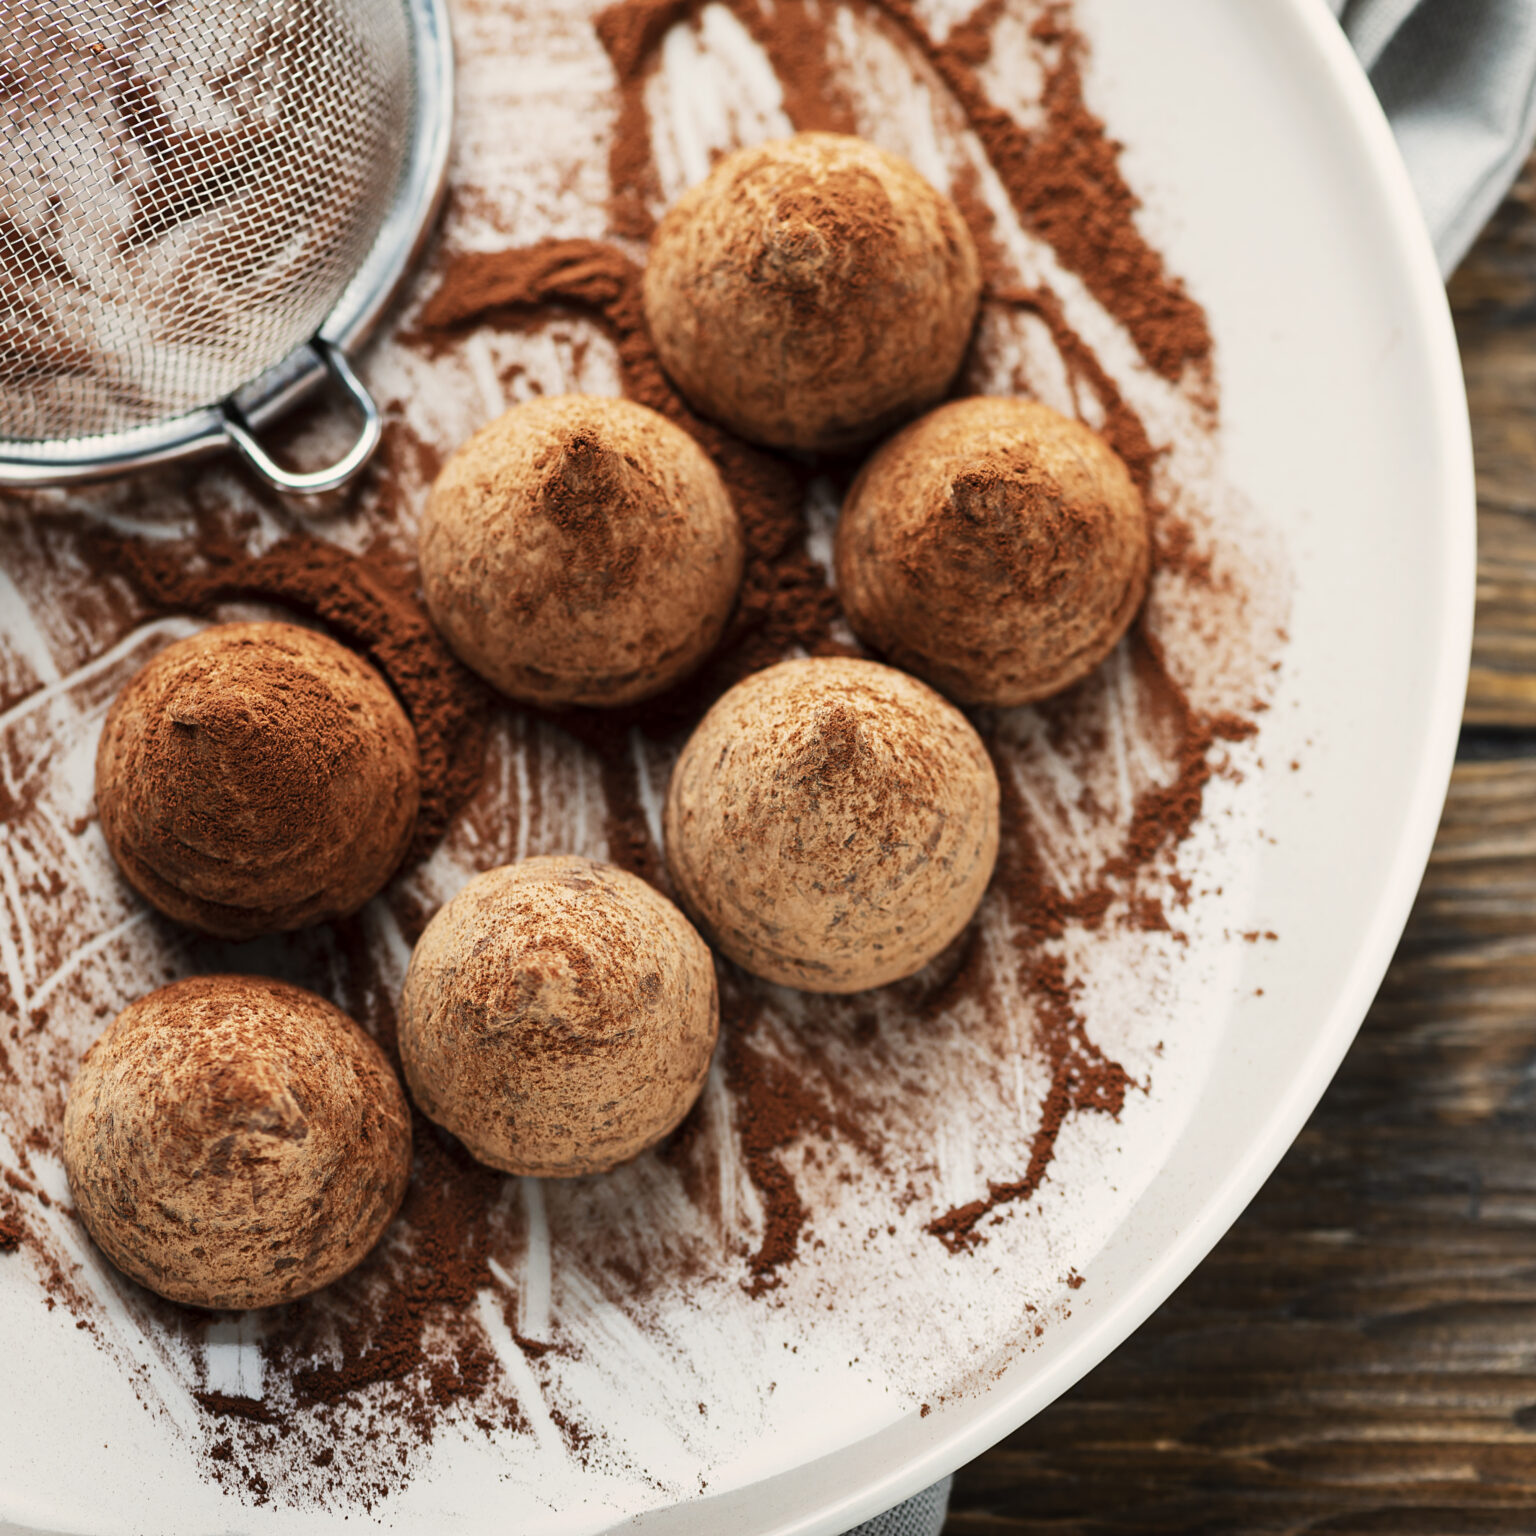 Homemade chocolate truffle on the wooden table, selective focus and square image